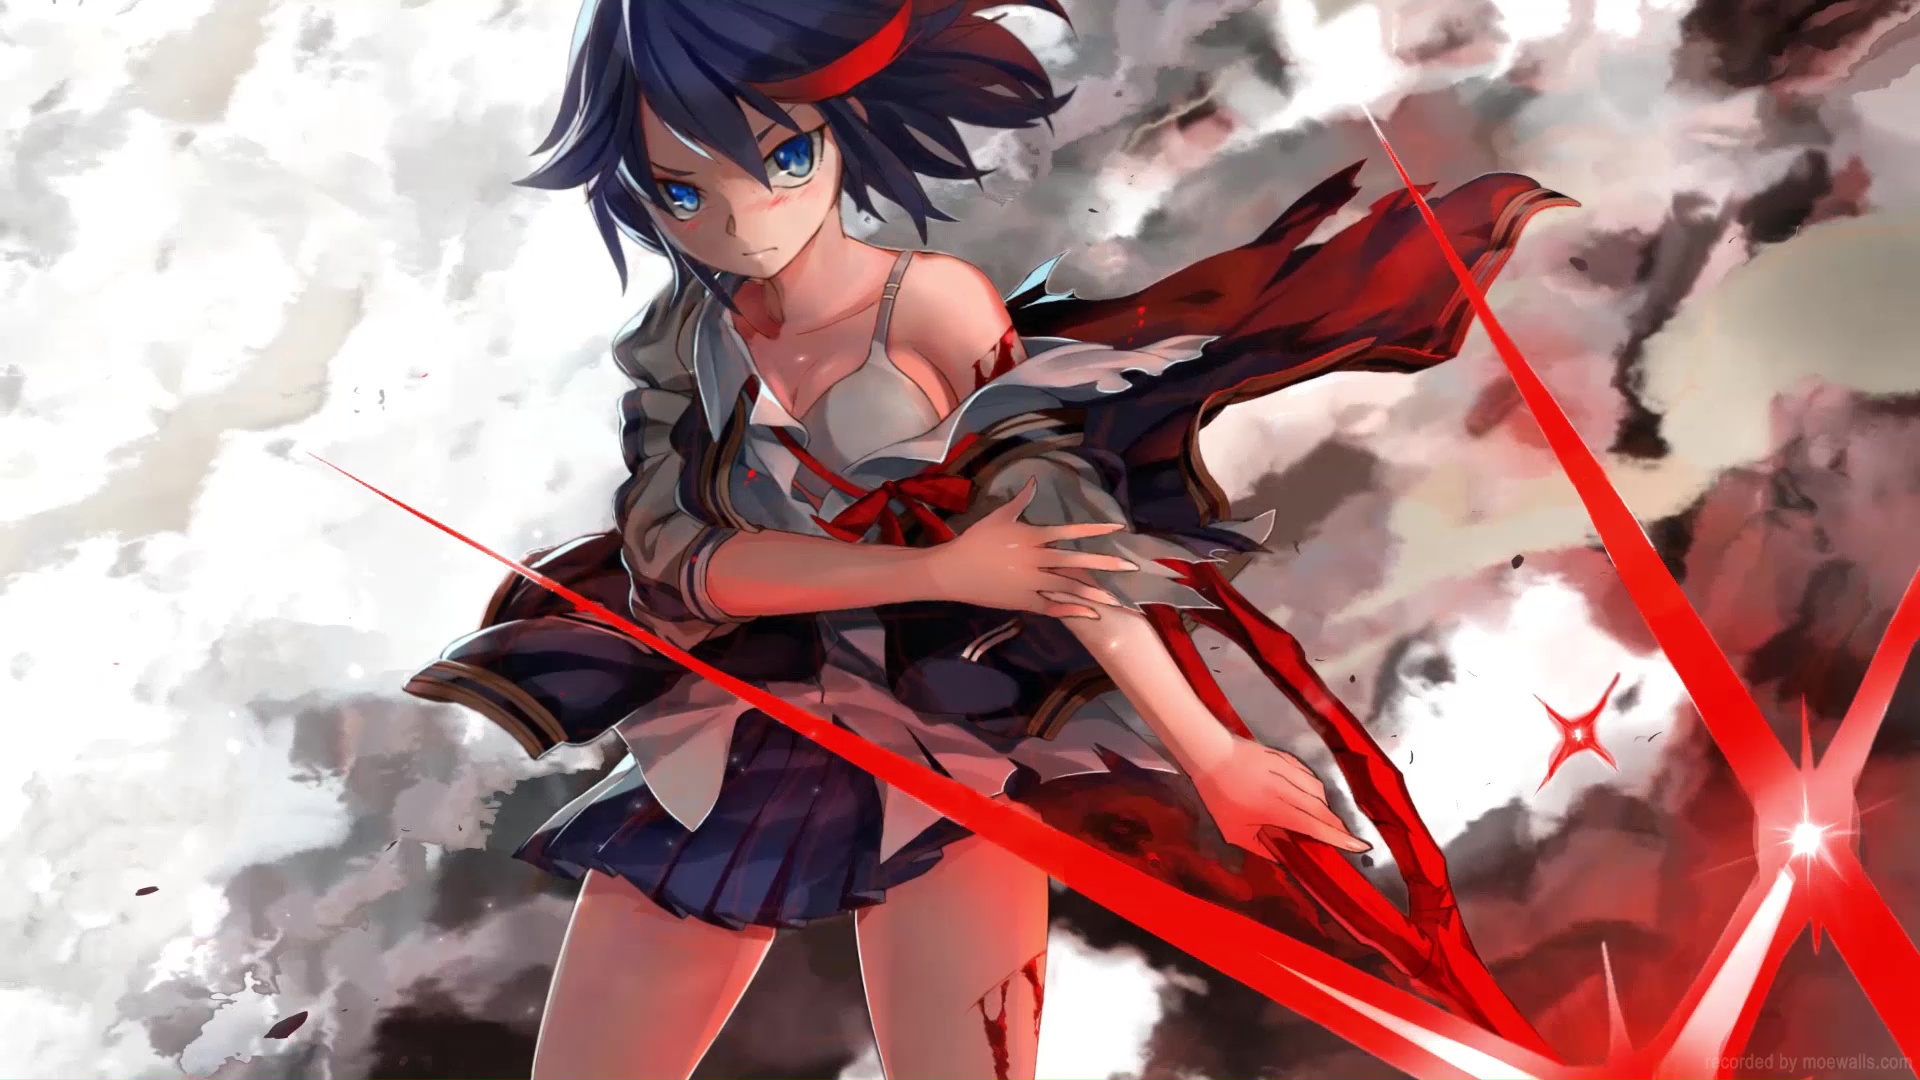 Ryuko Matoi Anime Character Paint By Numbers - BestPaintByNumbers.shop